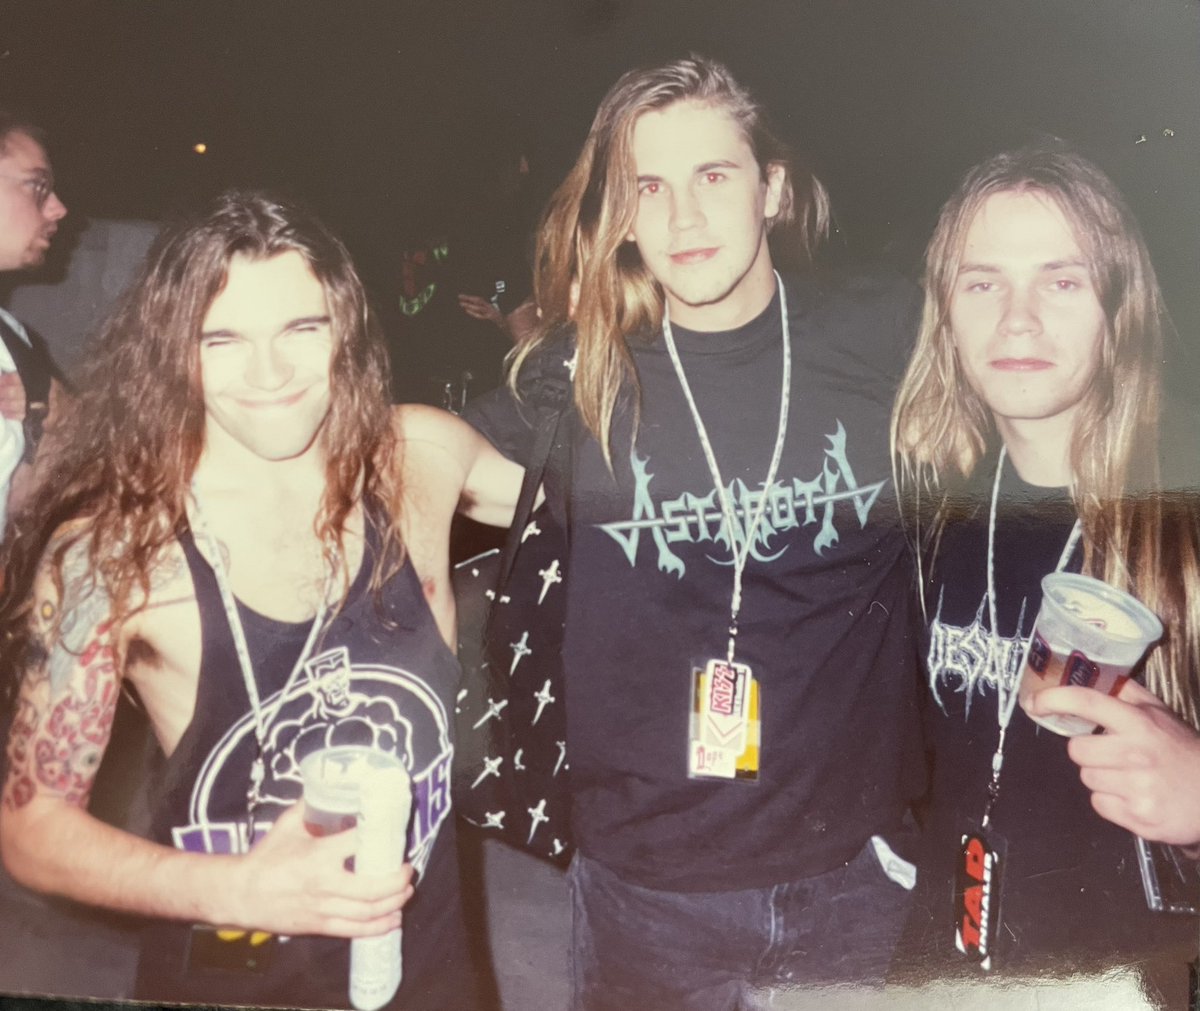 Here’s an old pic of me with their shirt, that’s Stefon from Desultory on my left and @JeremyXWagner on my right. Anyway, anyone know/remember Astaroth?